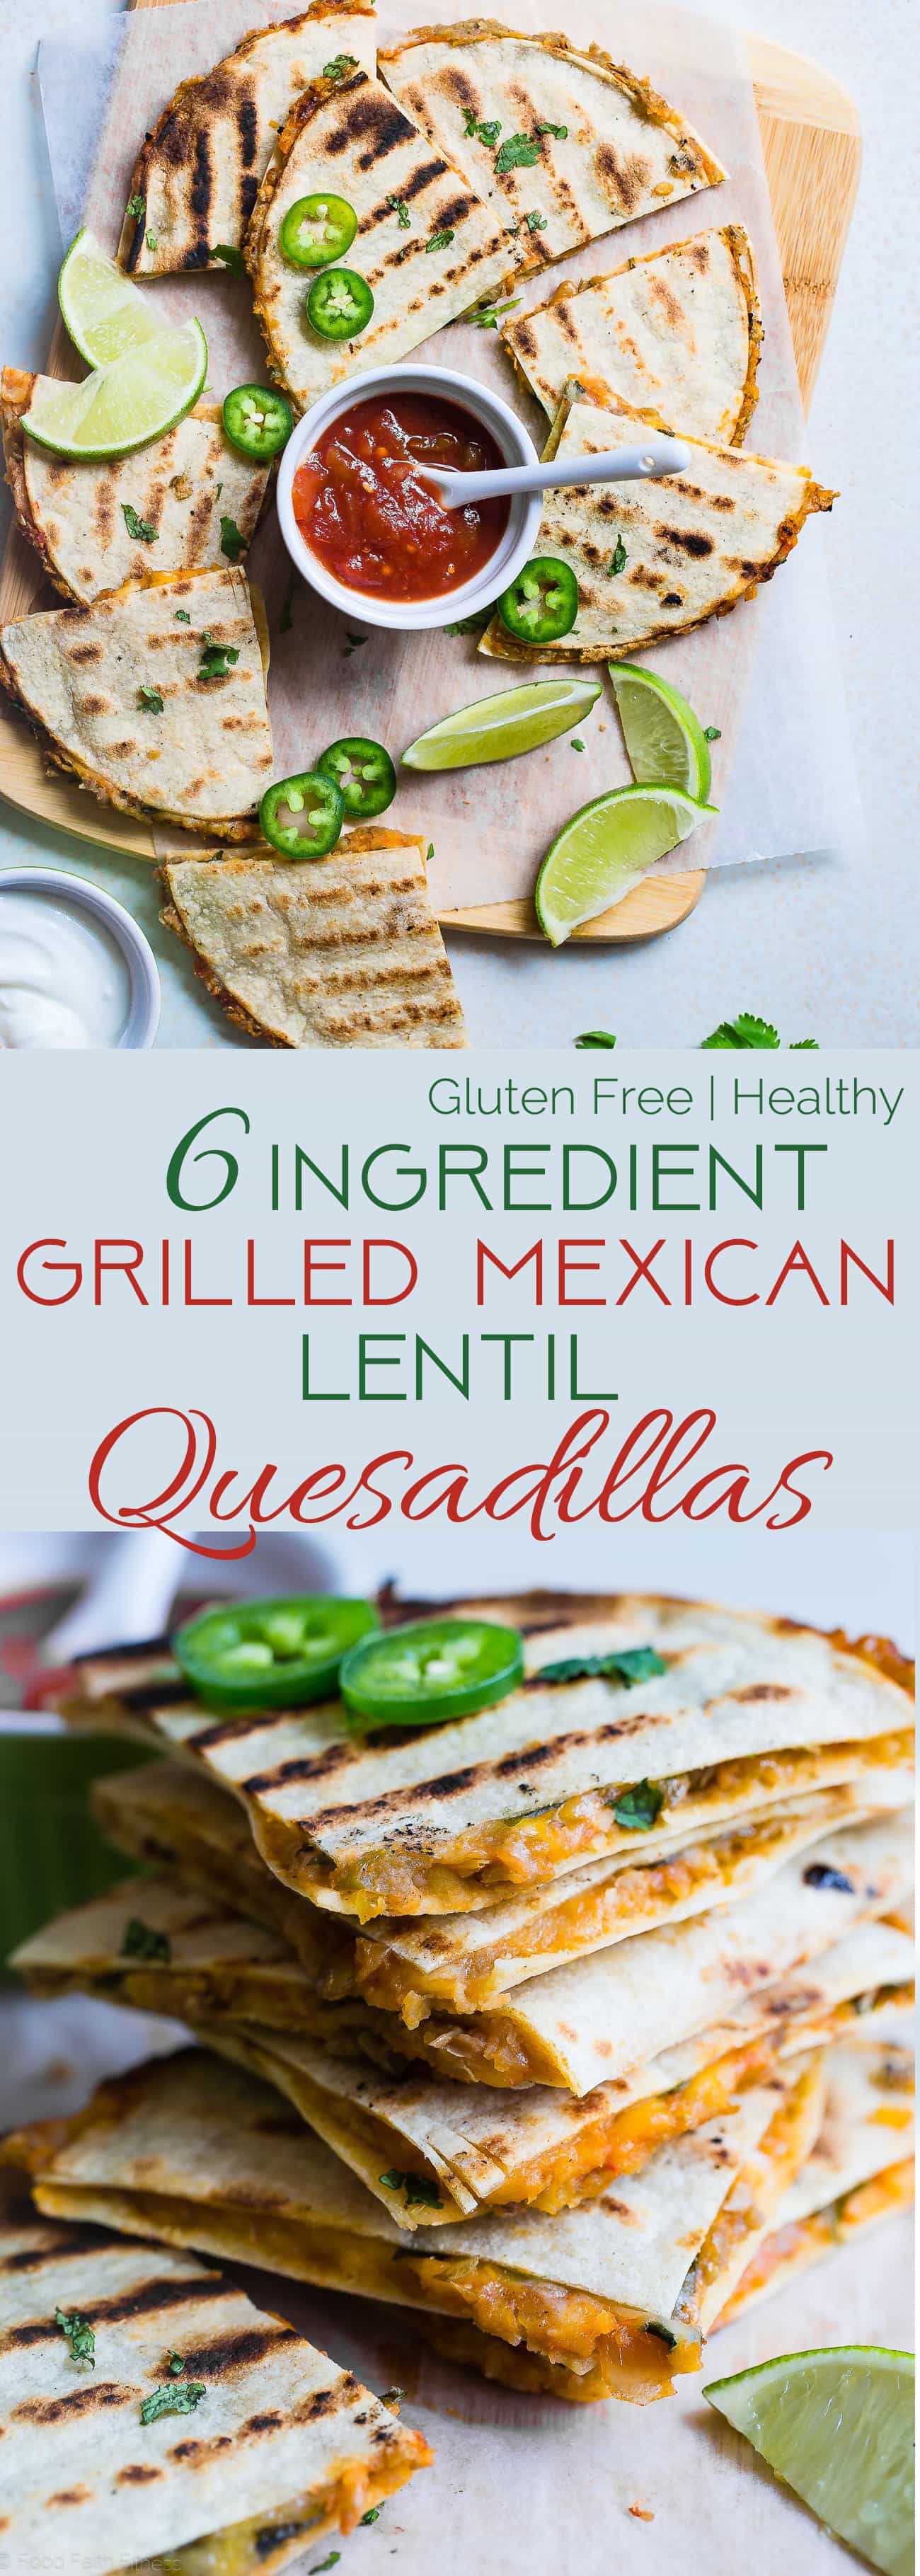 Collage image of Grilled Mexican Lentil Quesadillas. Recipe on Foodfaithfitness.com